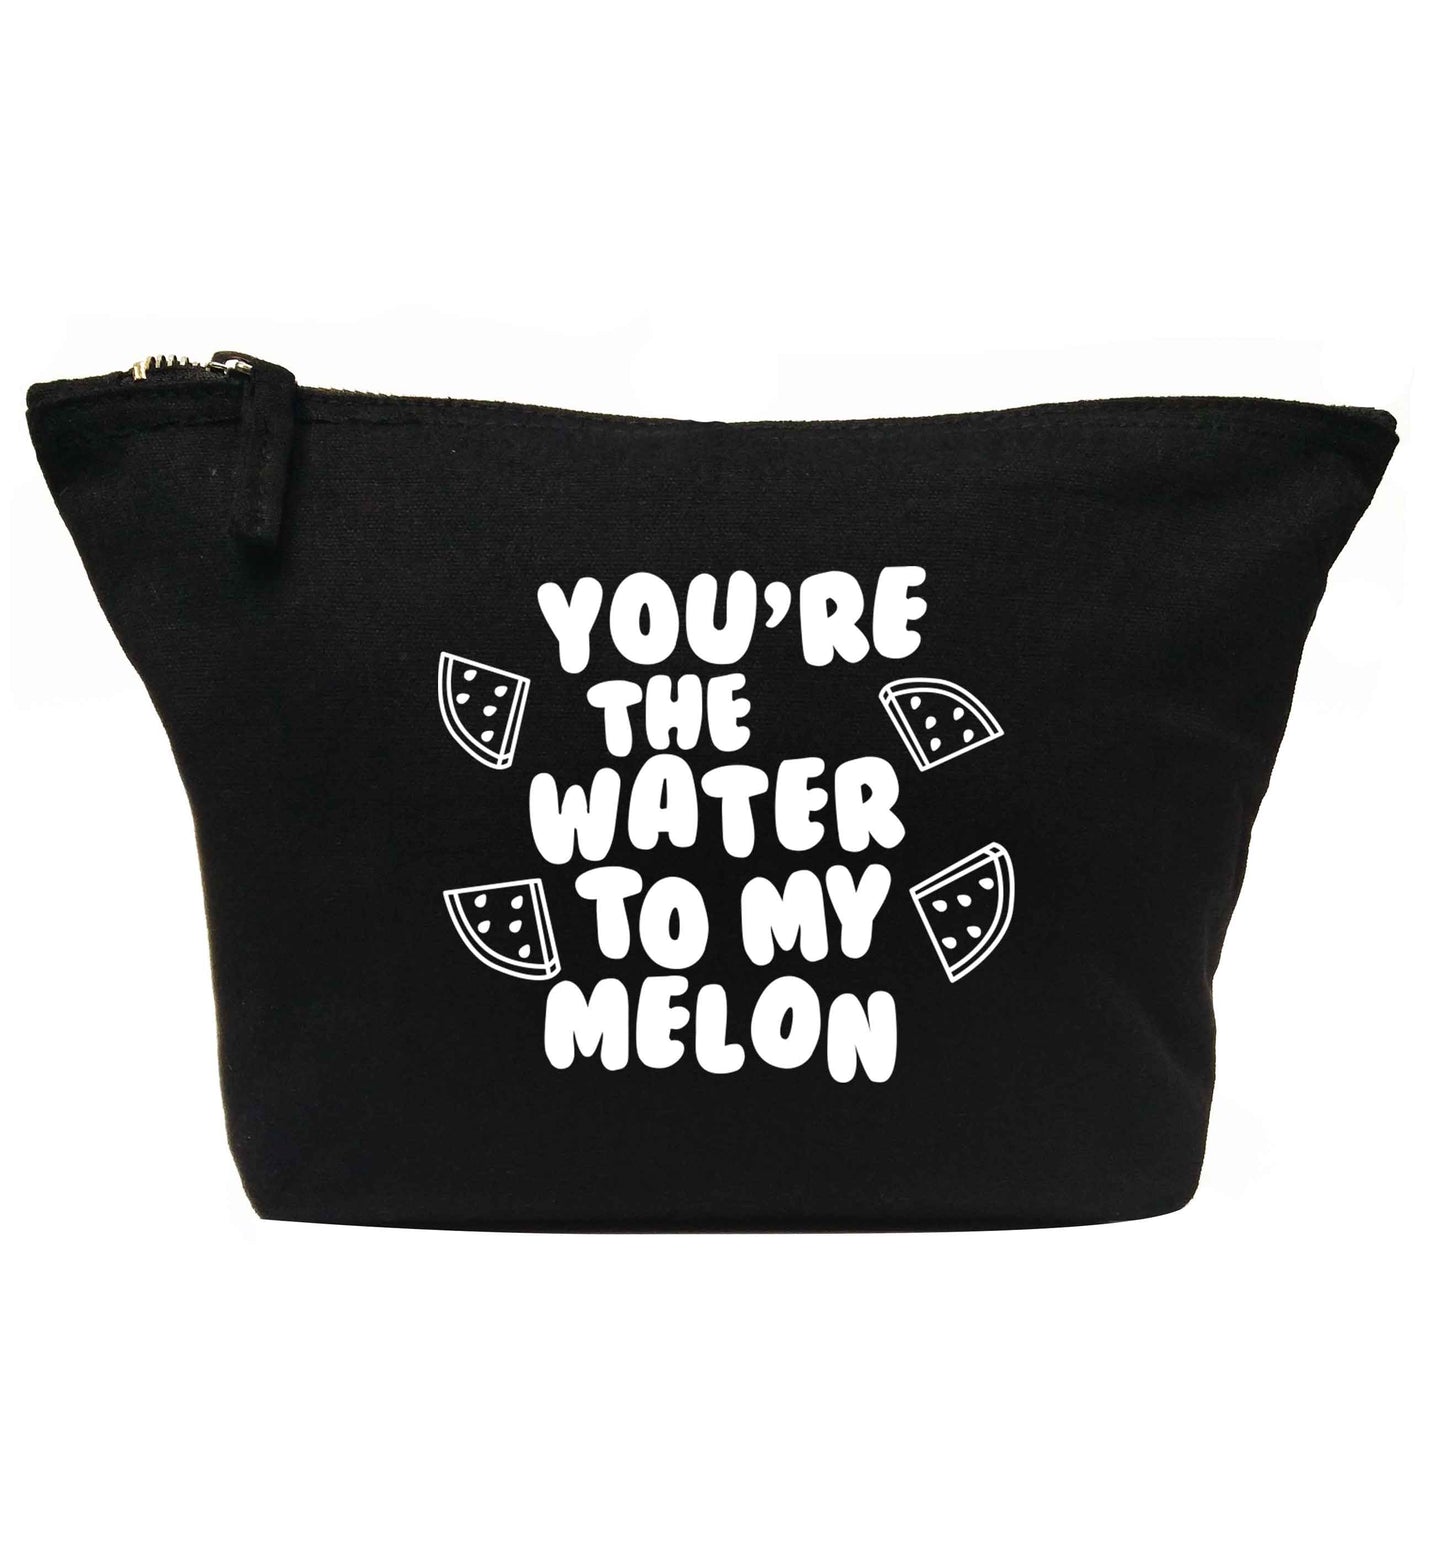 You're the water to my melon | Makeup / wash bag